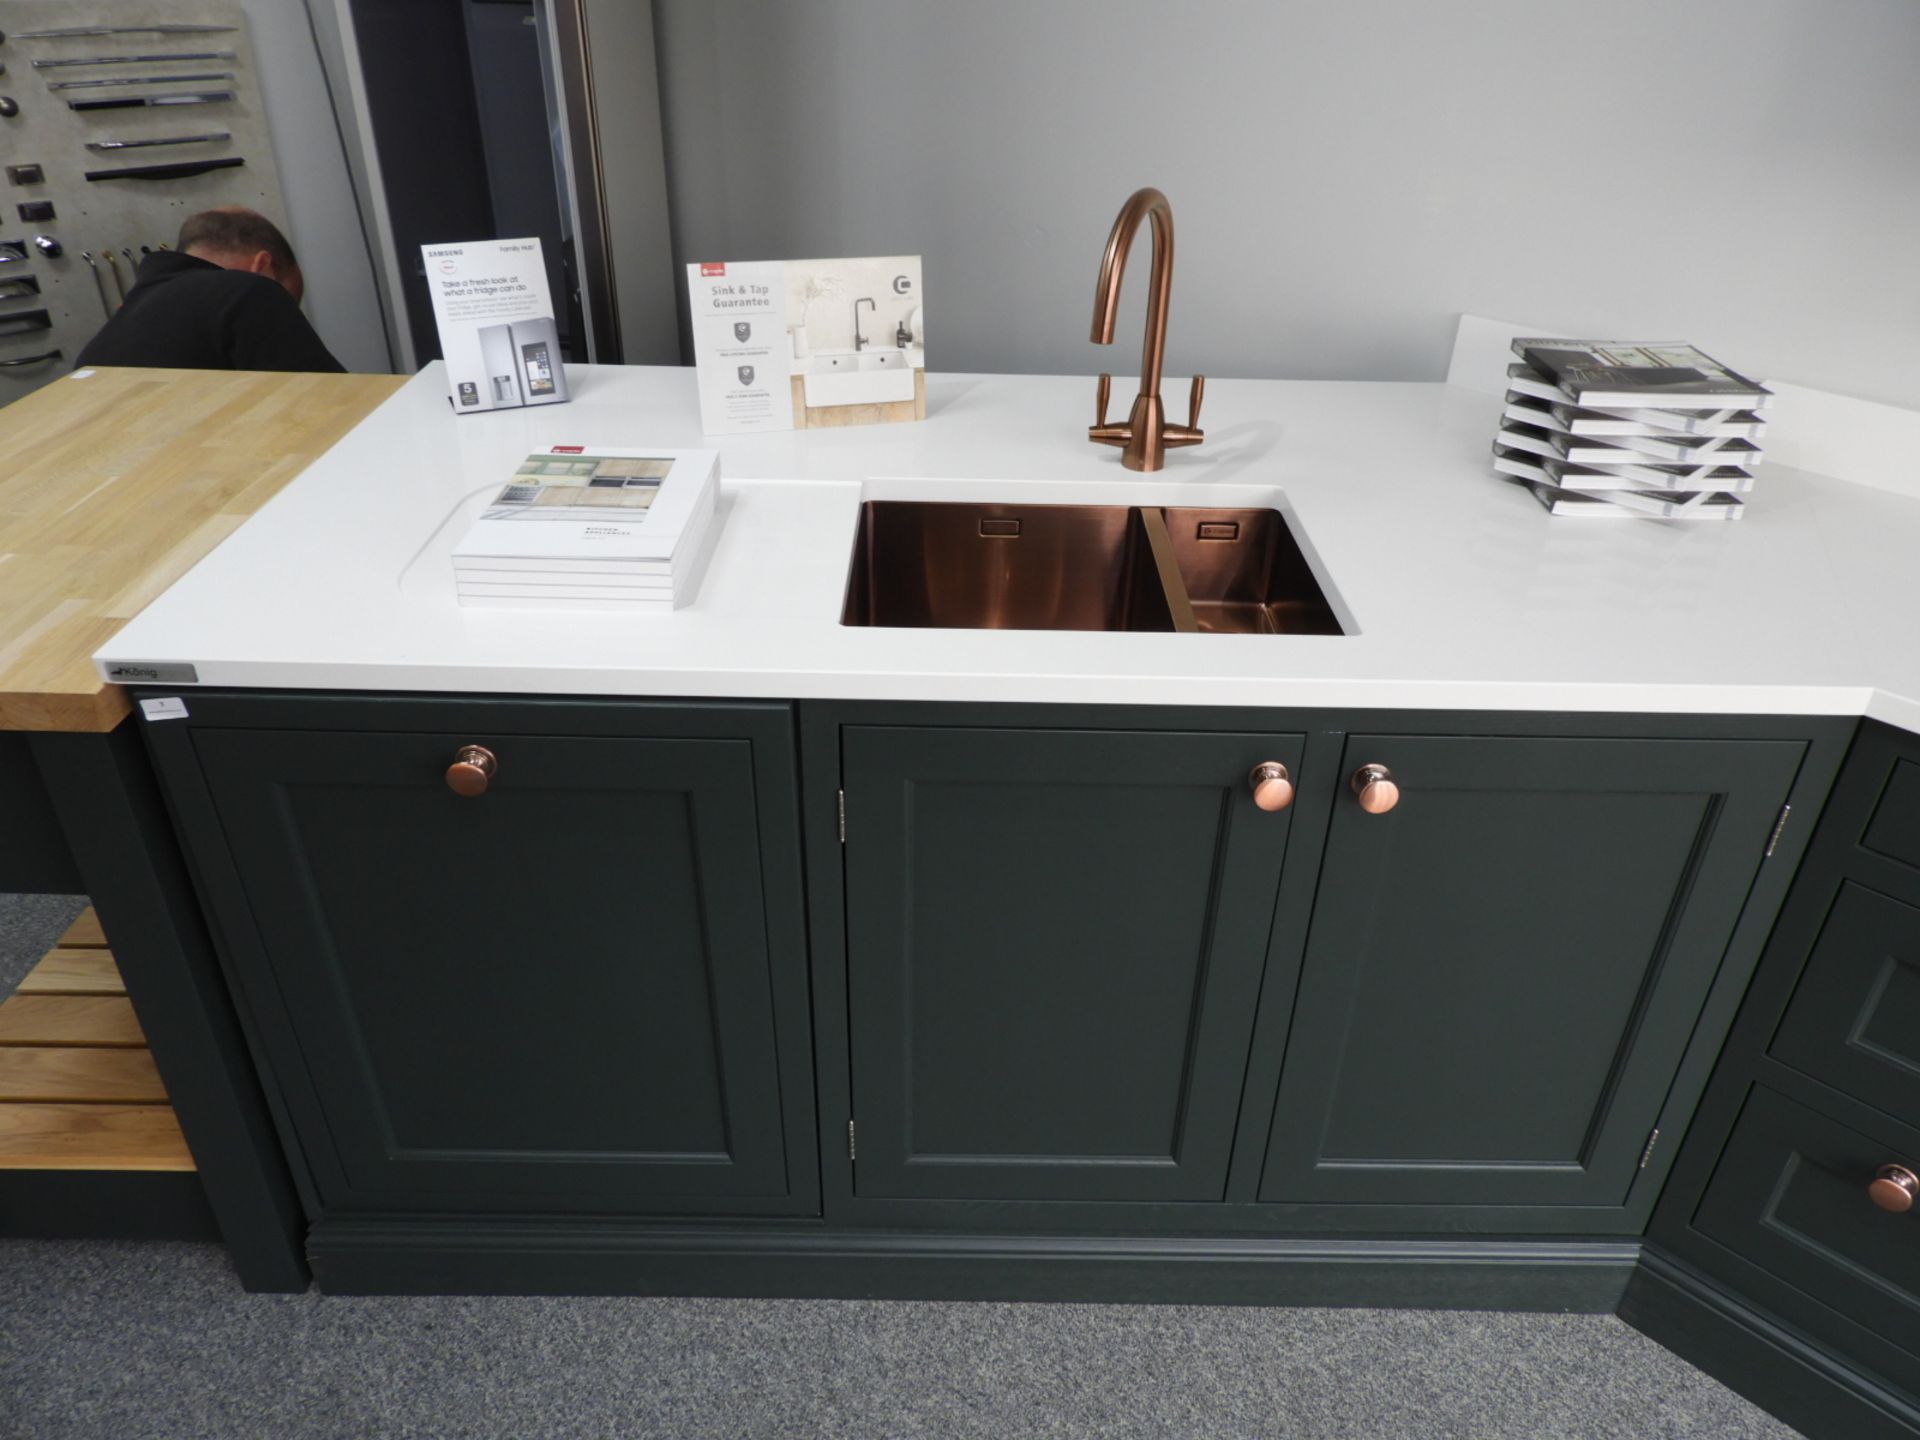 *Belgravia Forest Green Display Kitchen - Image 3 of 4